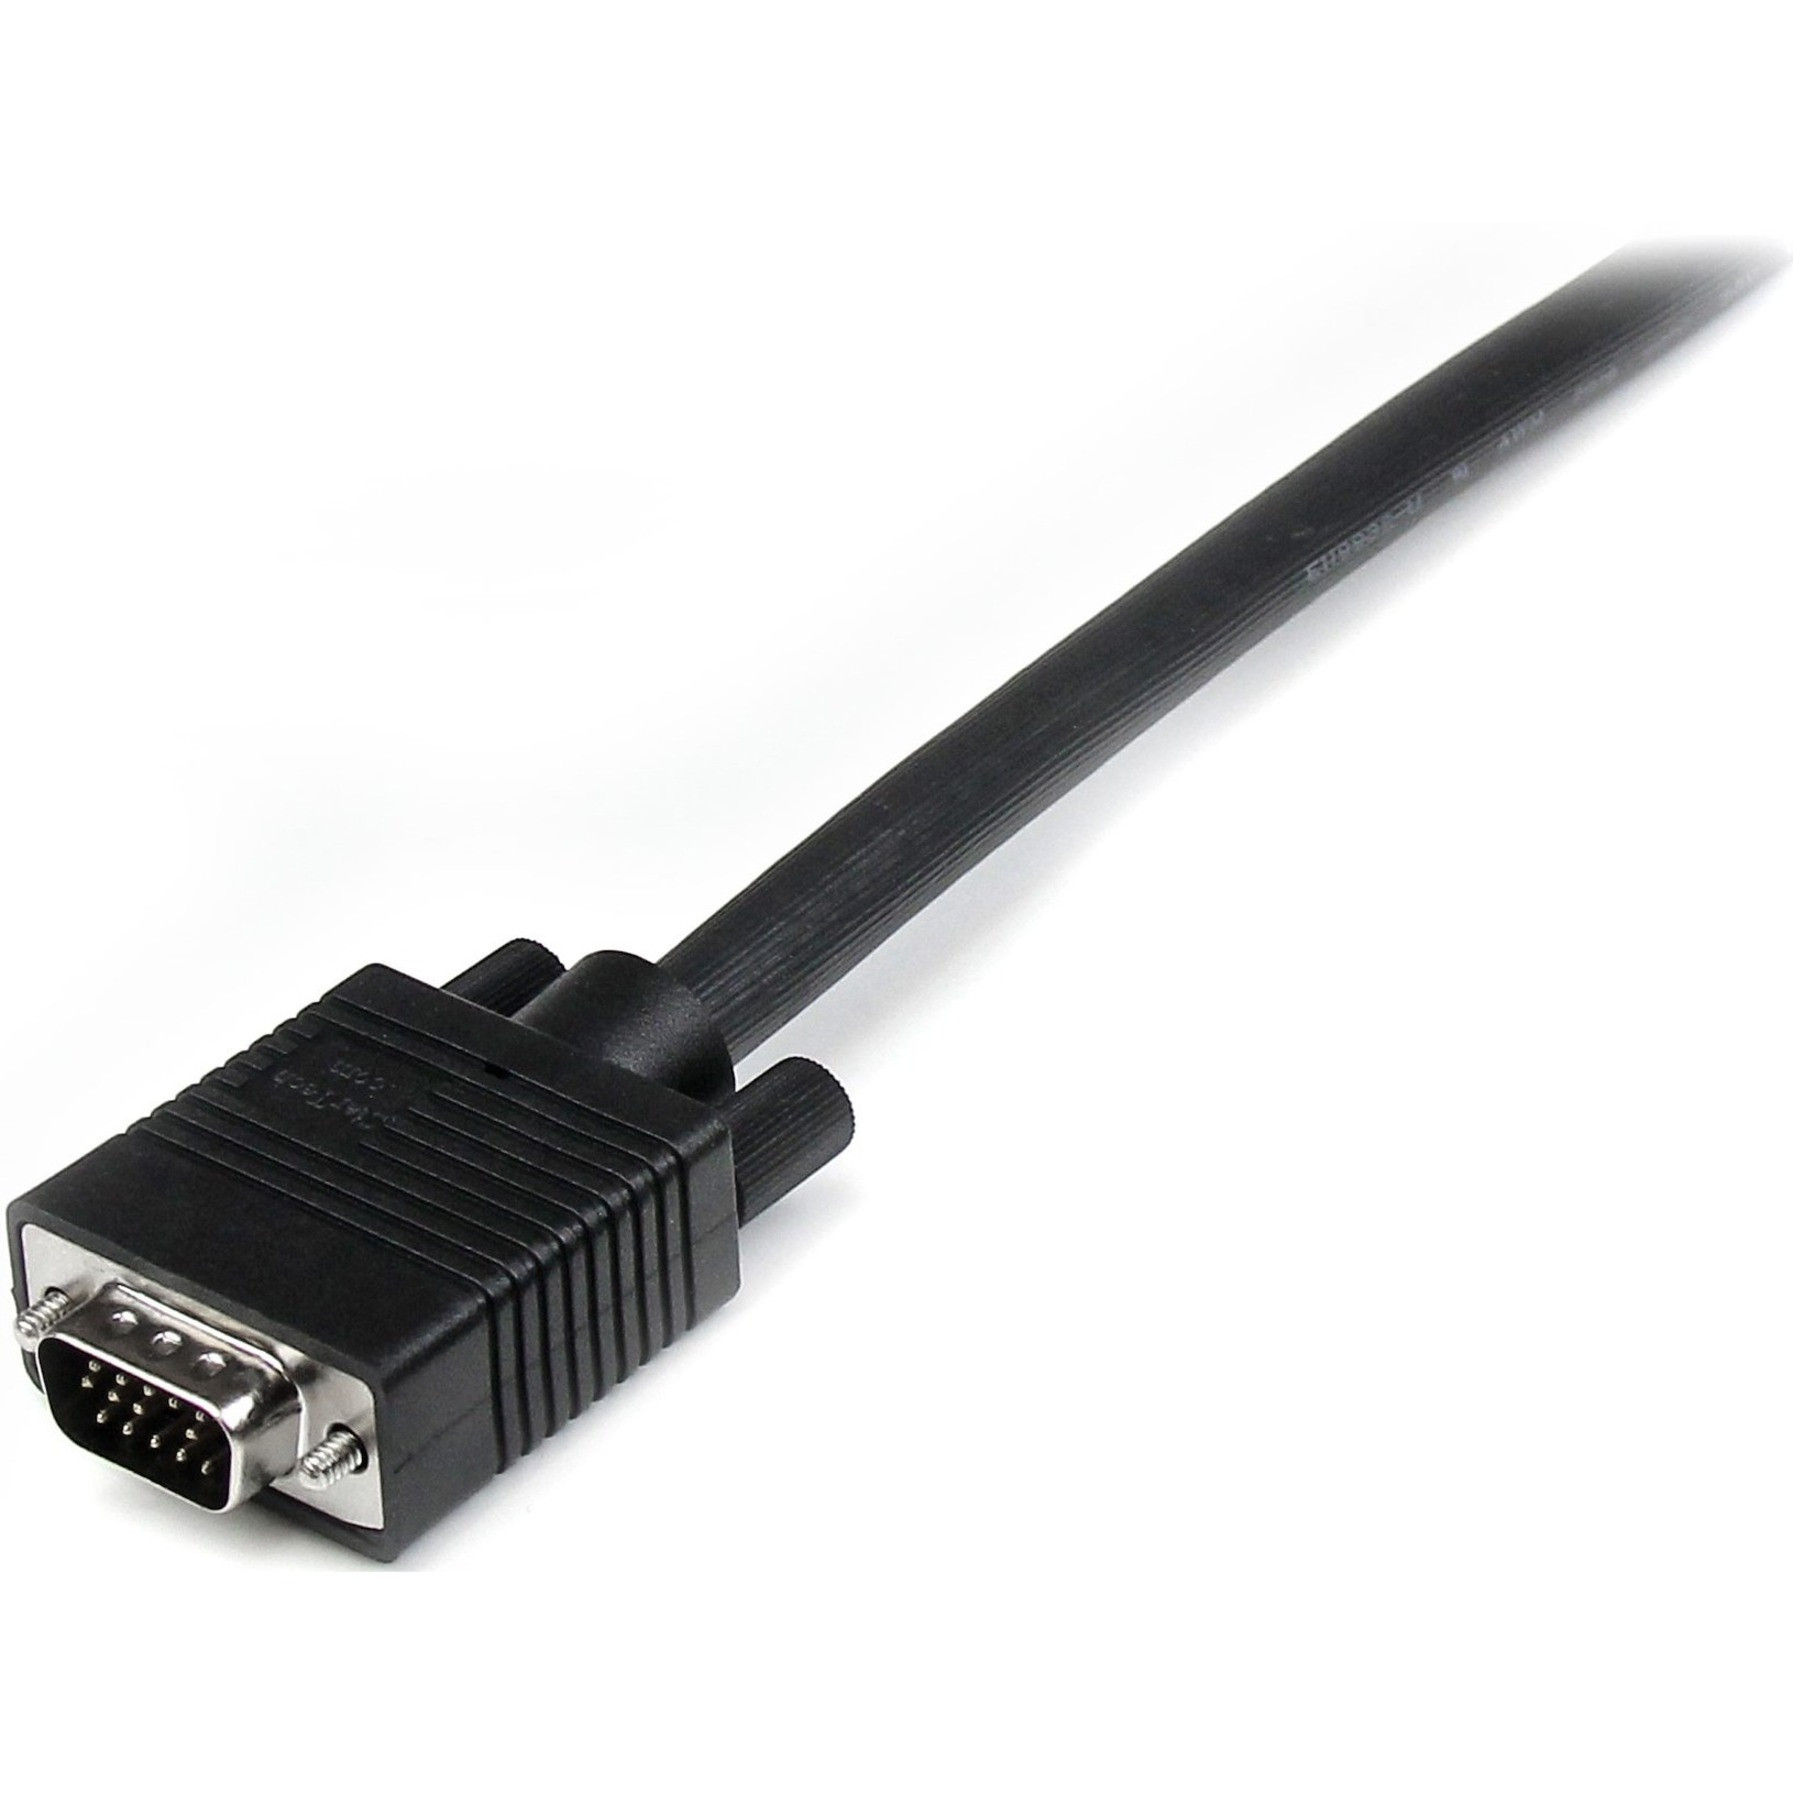 Startech .com 30 ft Coax High Resolution VGA Monitor CableHD15 M/MConnect your VGA monitor with the highest quality connection availab… MXT101MMHQ30